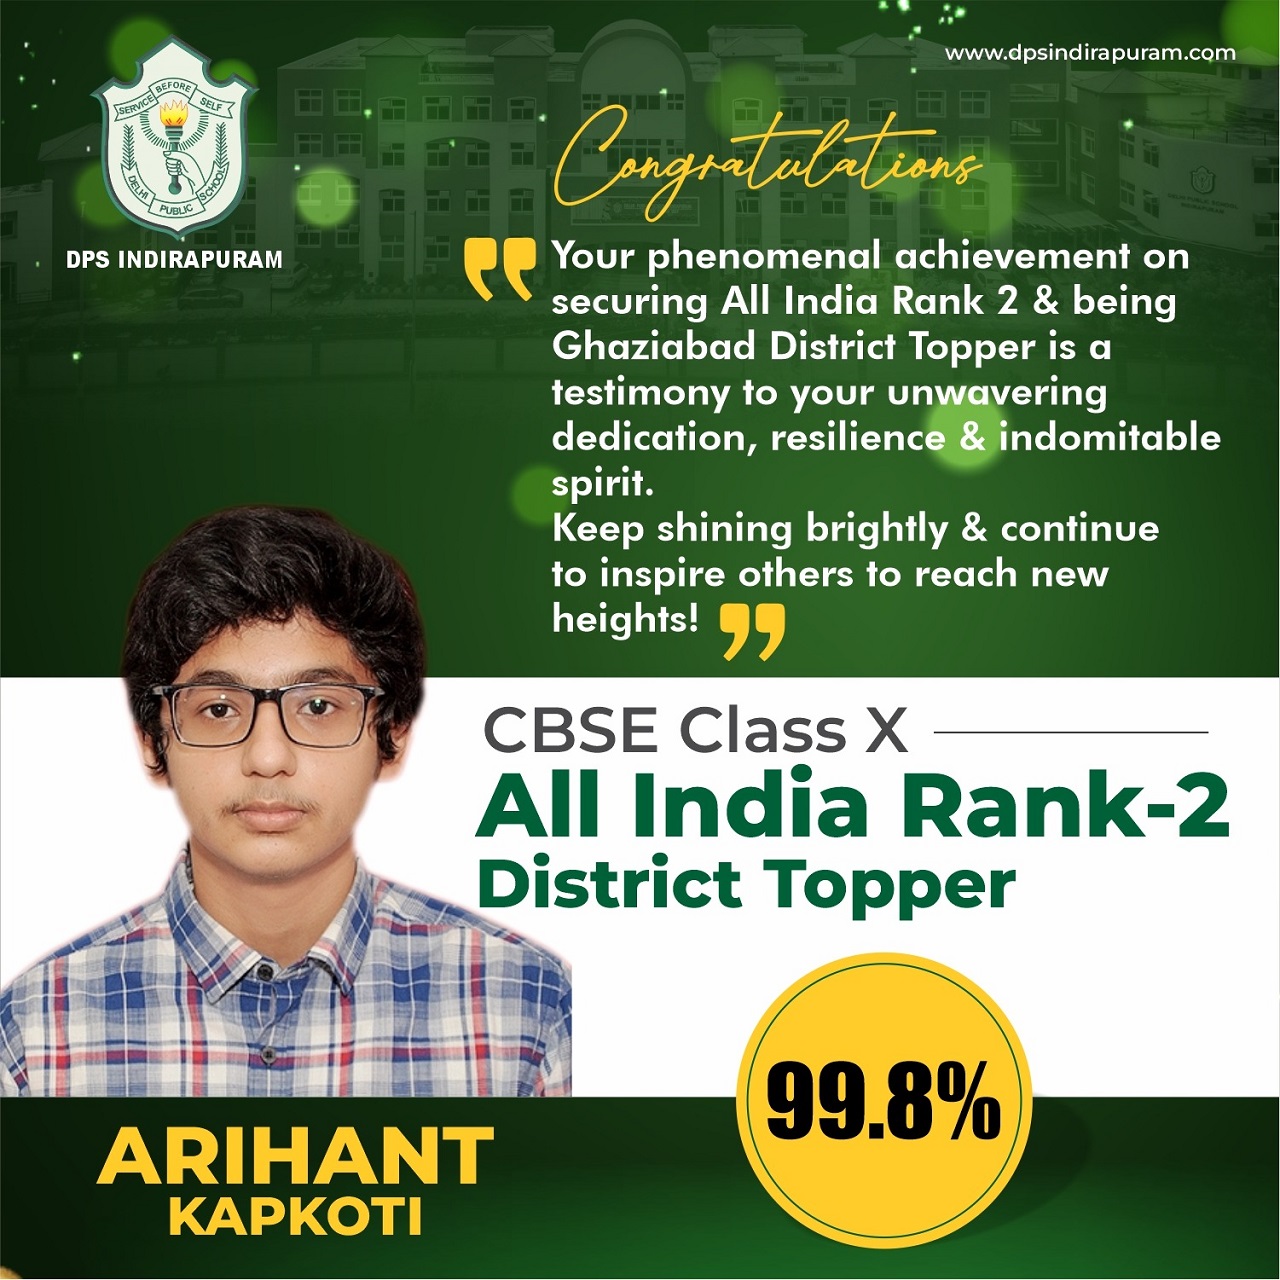 All India Rank-2 (District Topper)